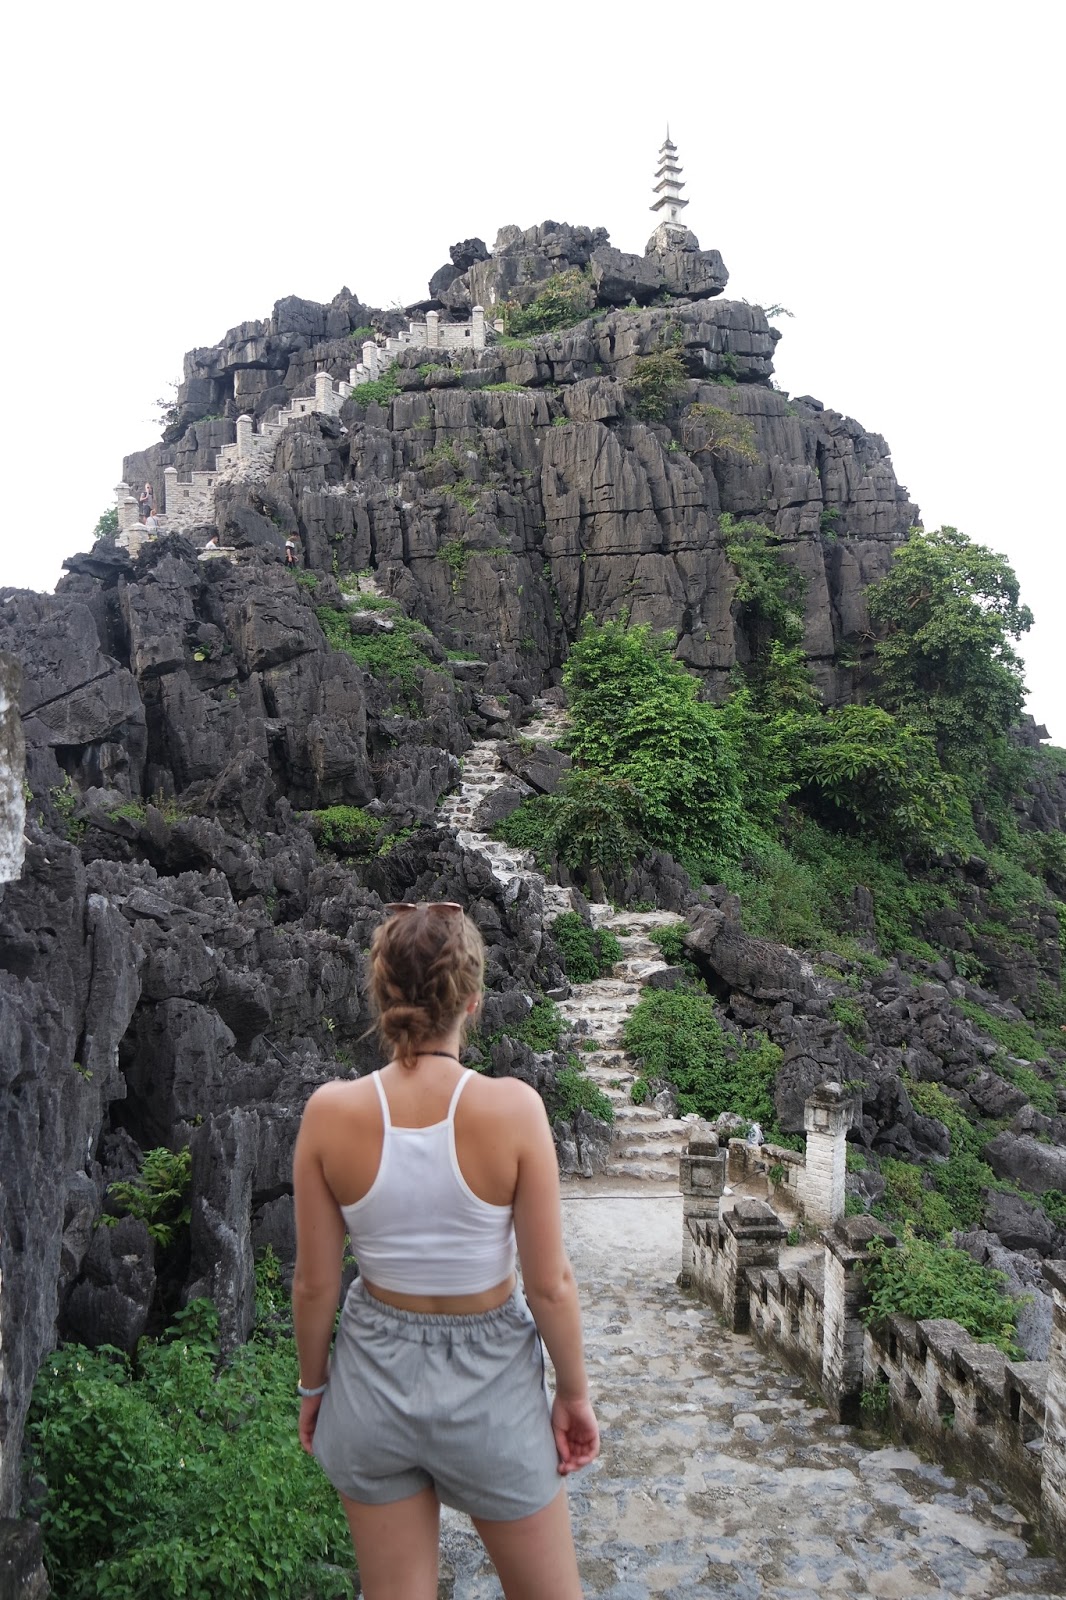 Ninh Binh - An Escape From The City